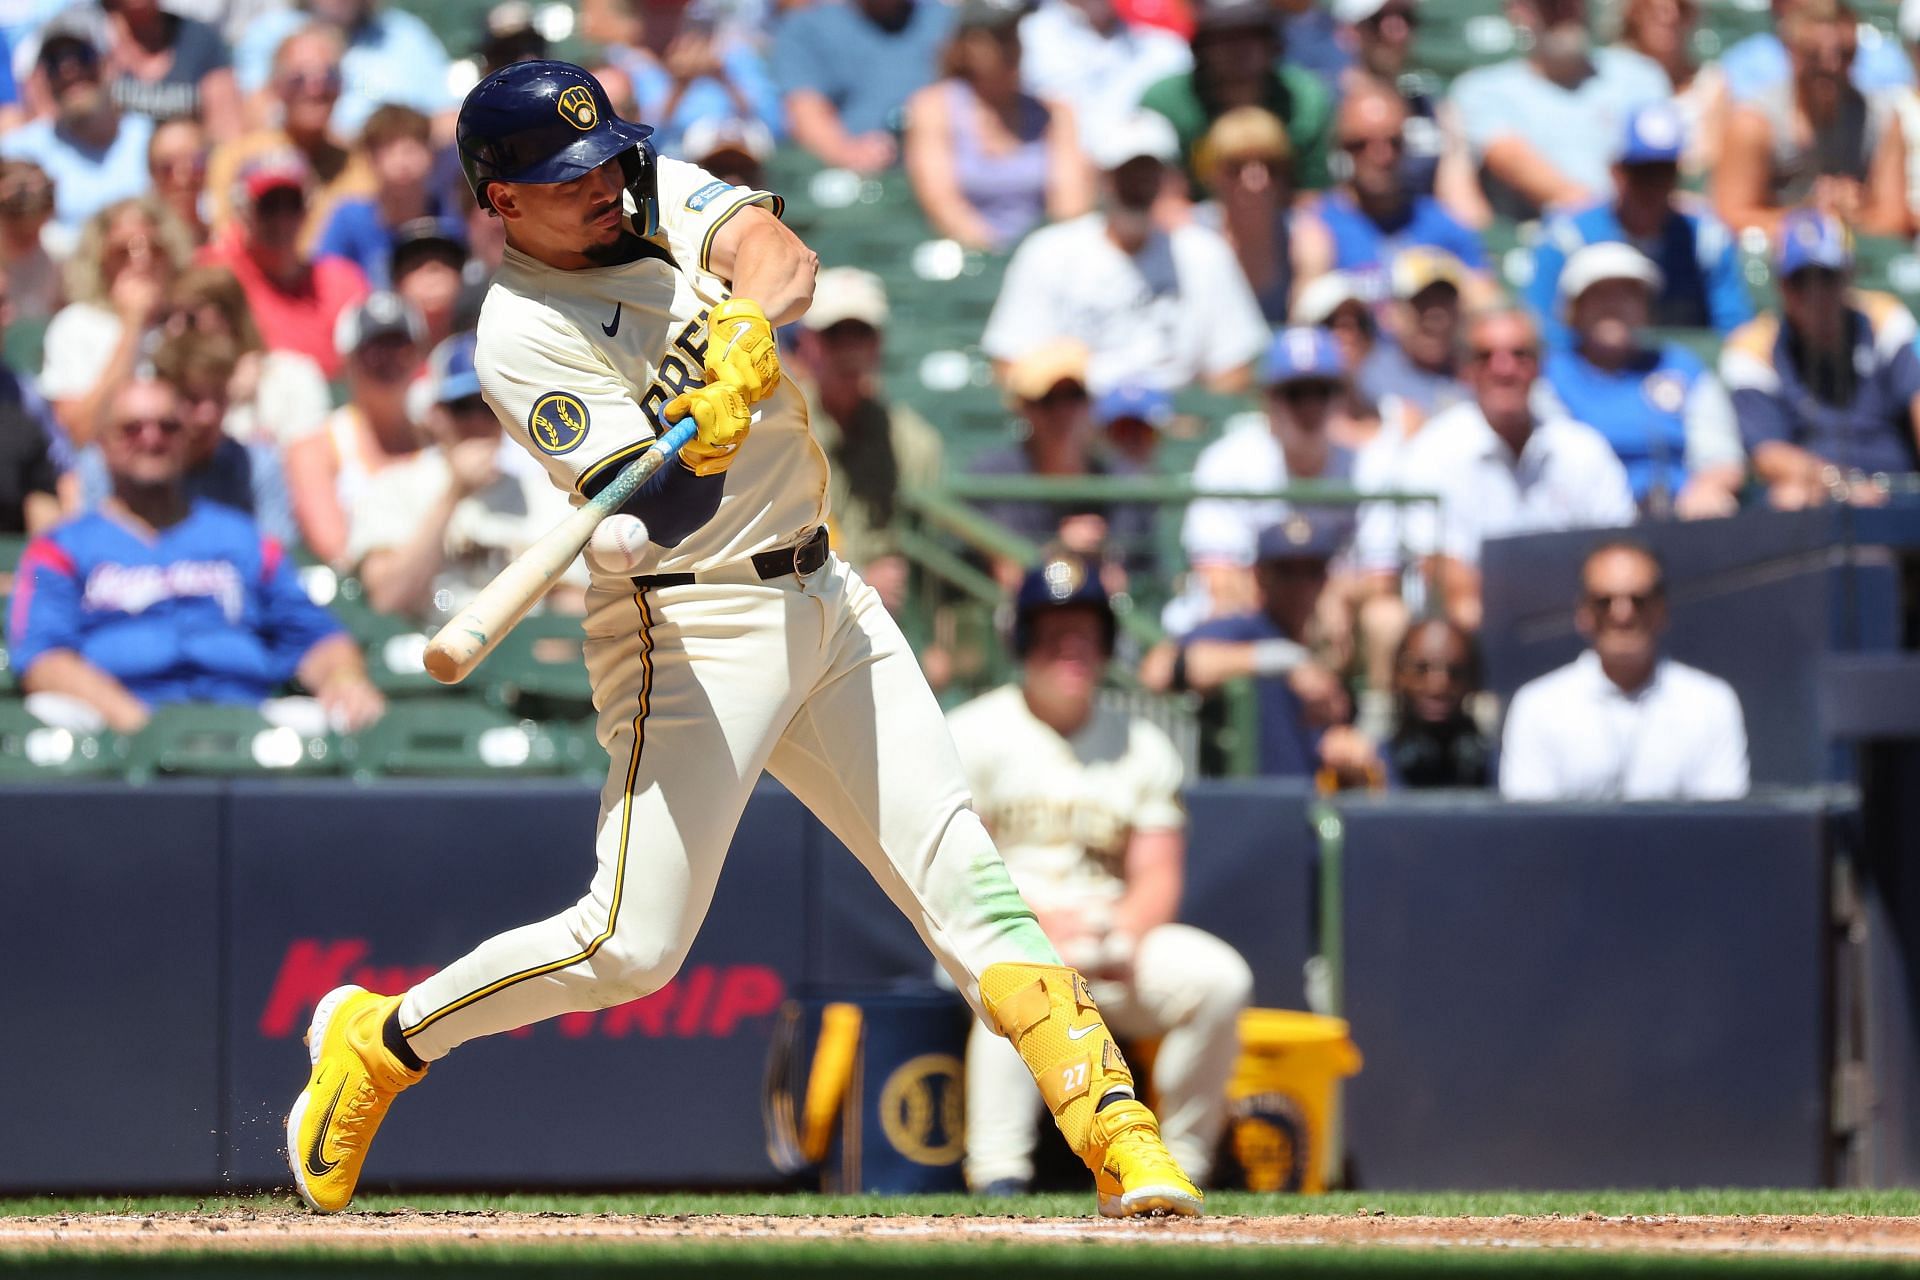 Willy Adames is due for a home run